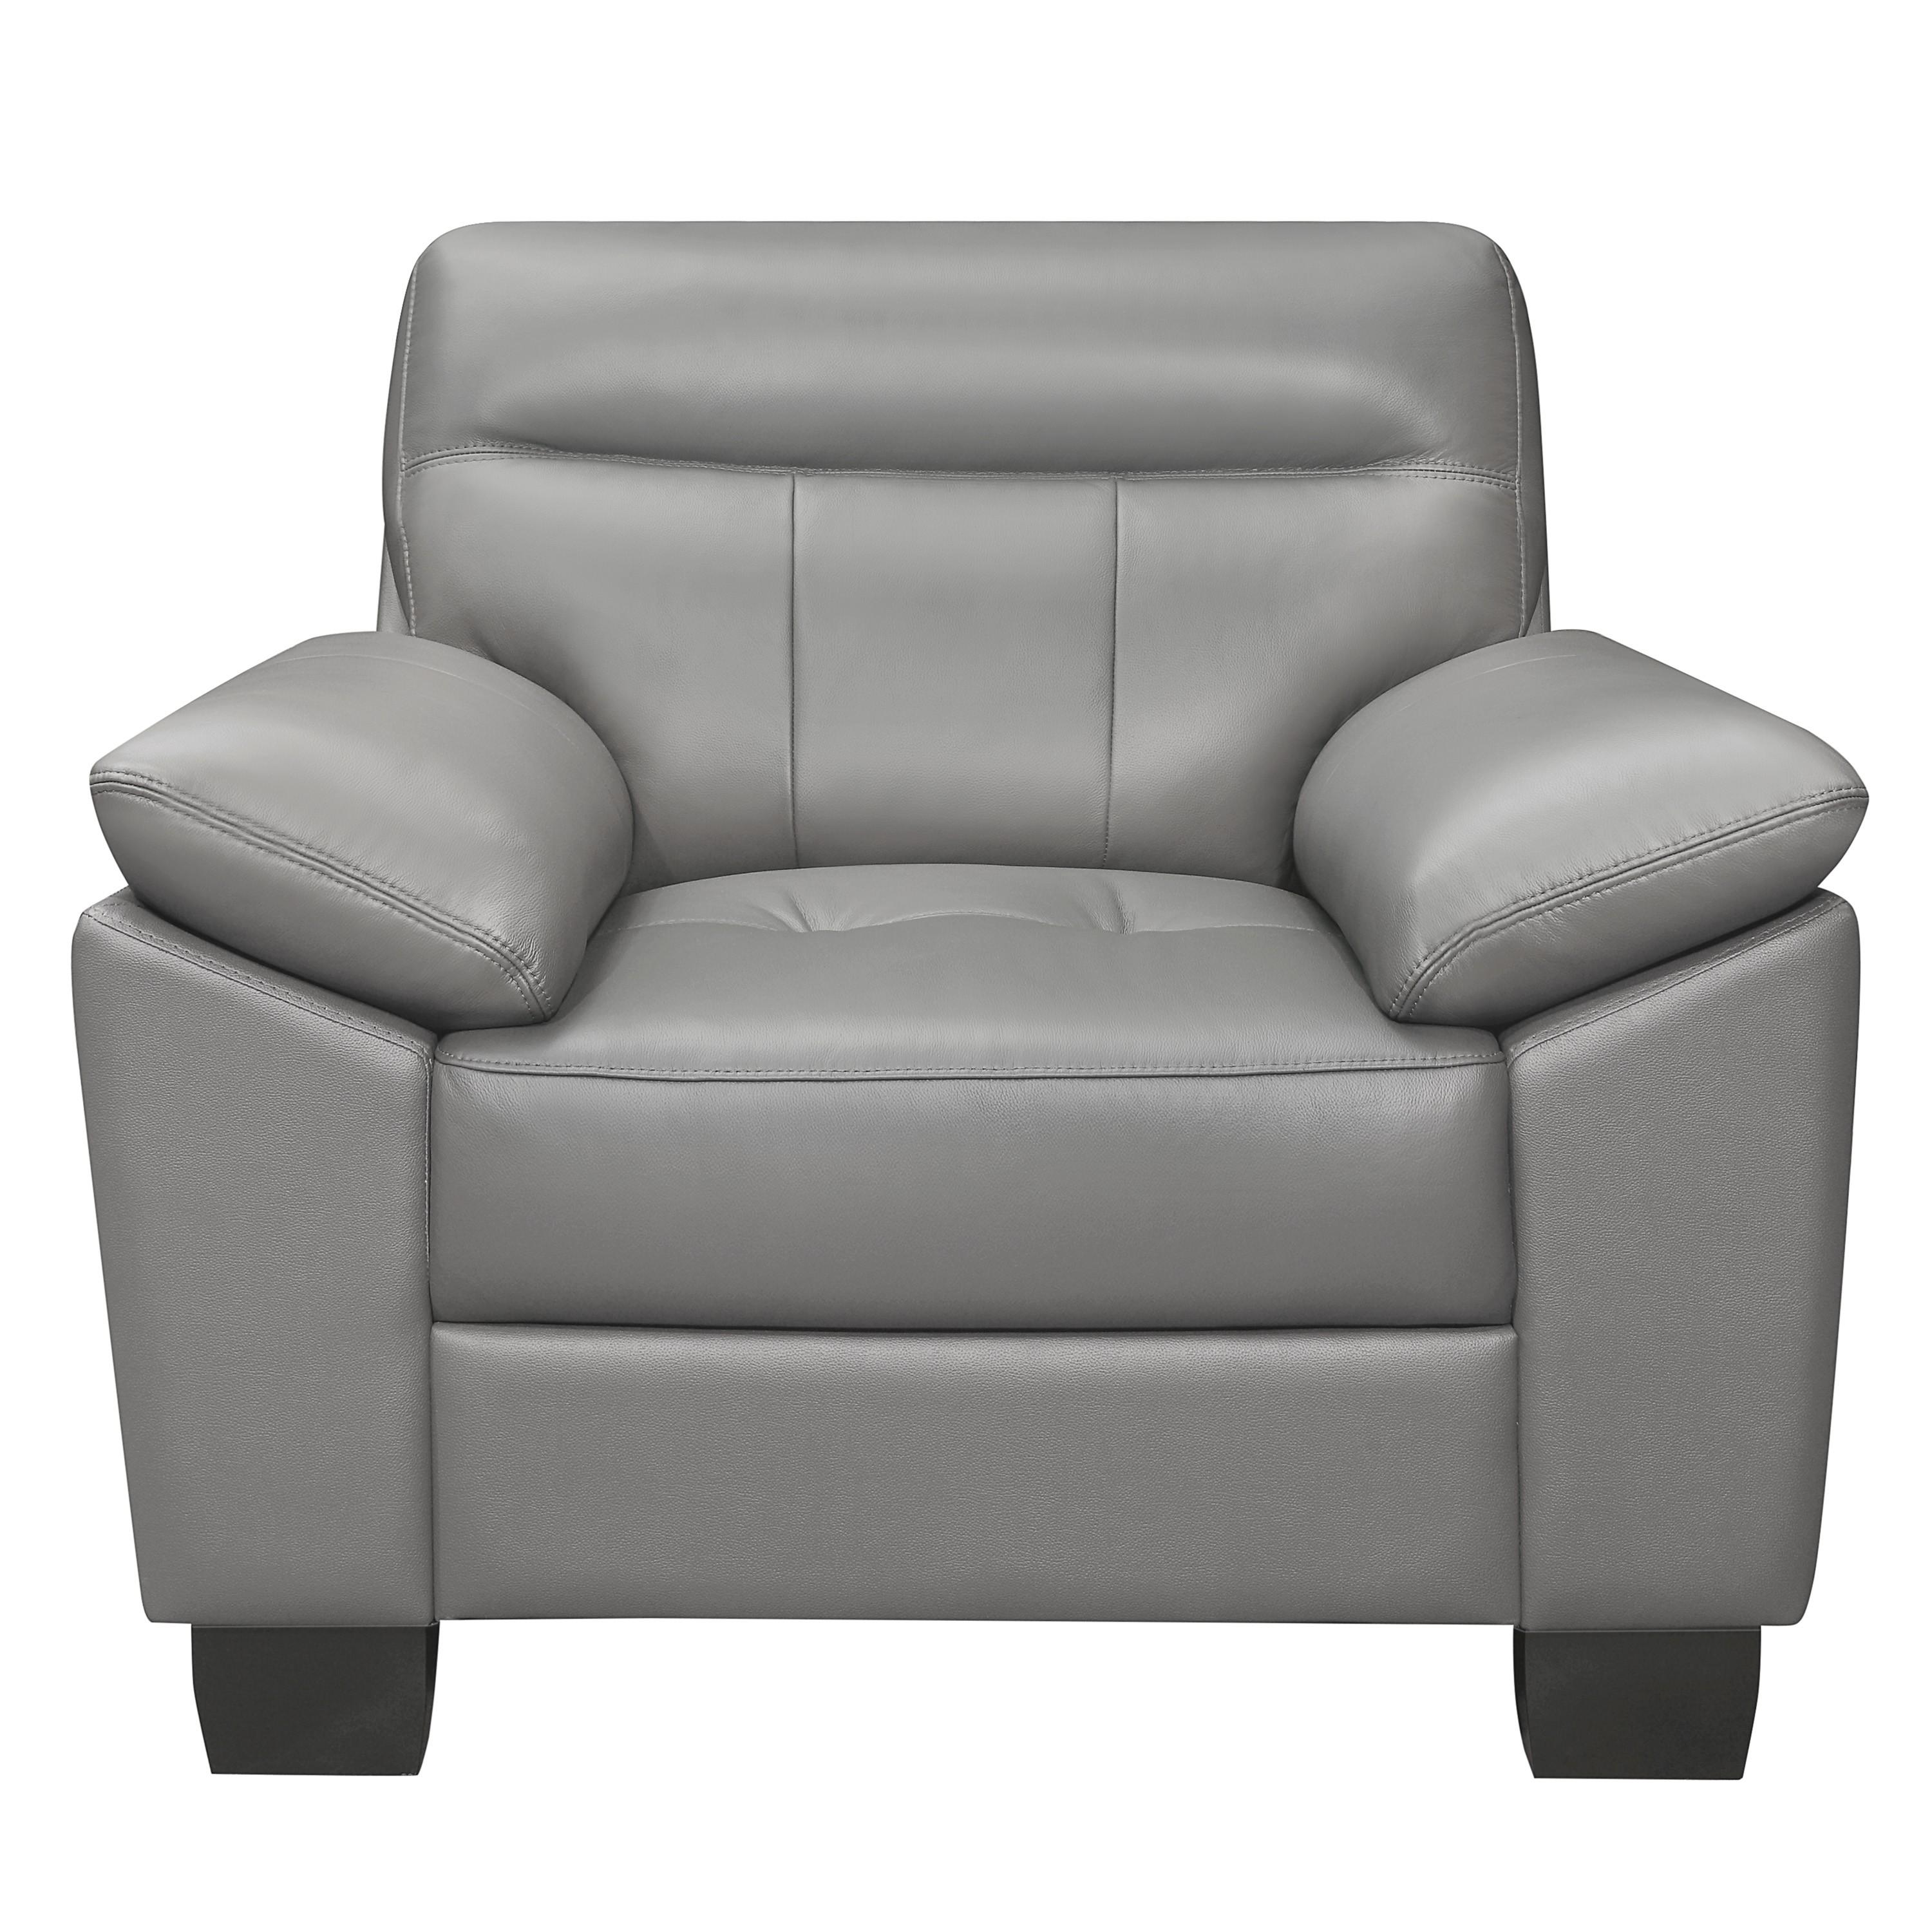 Modern Arm Chair 9537GRY-1 Denizen 9537GRY-1 in Gray Leather